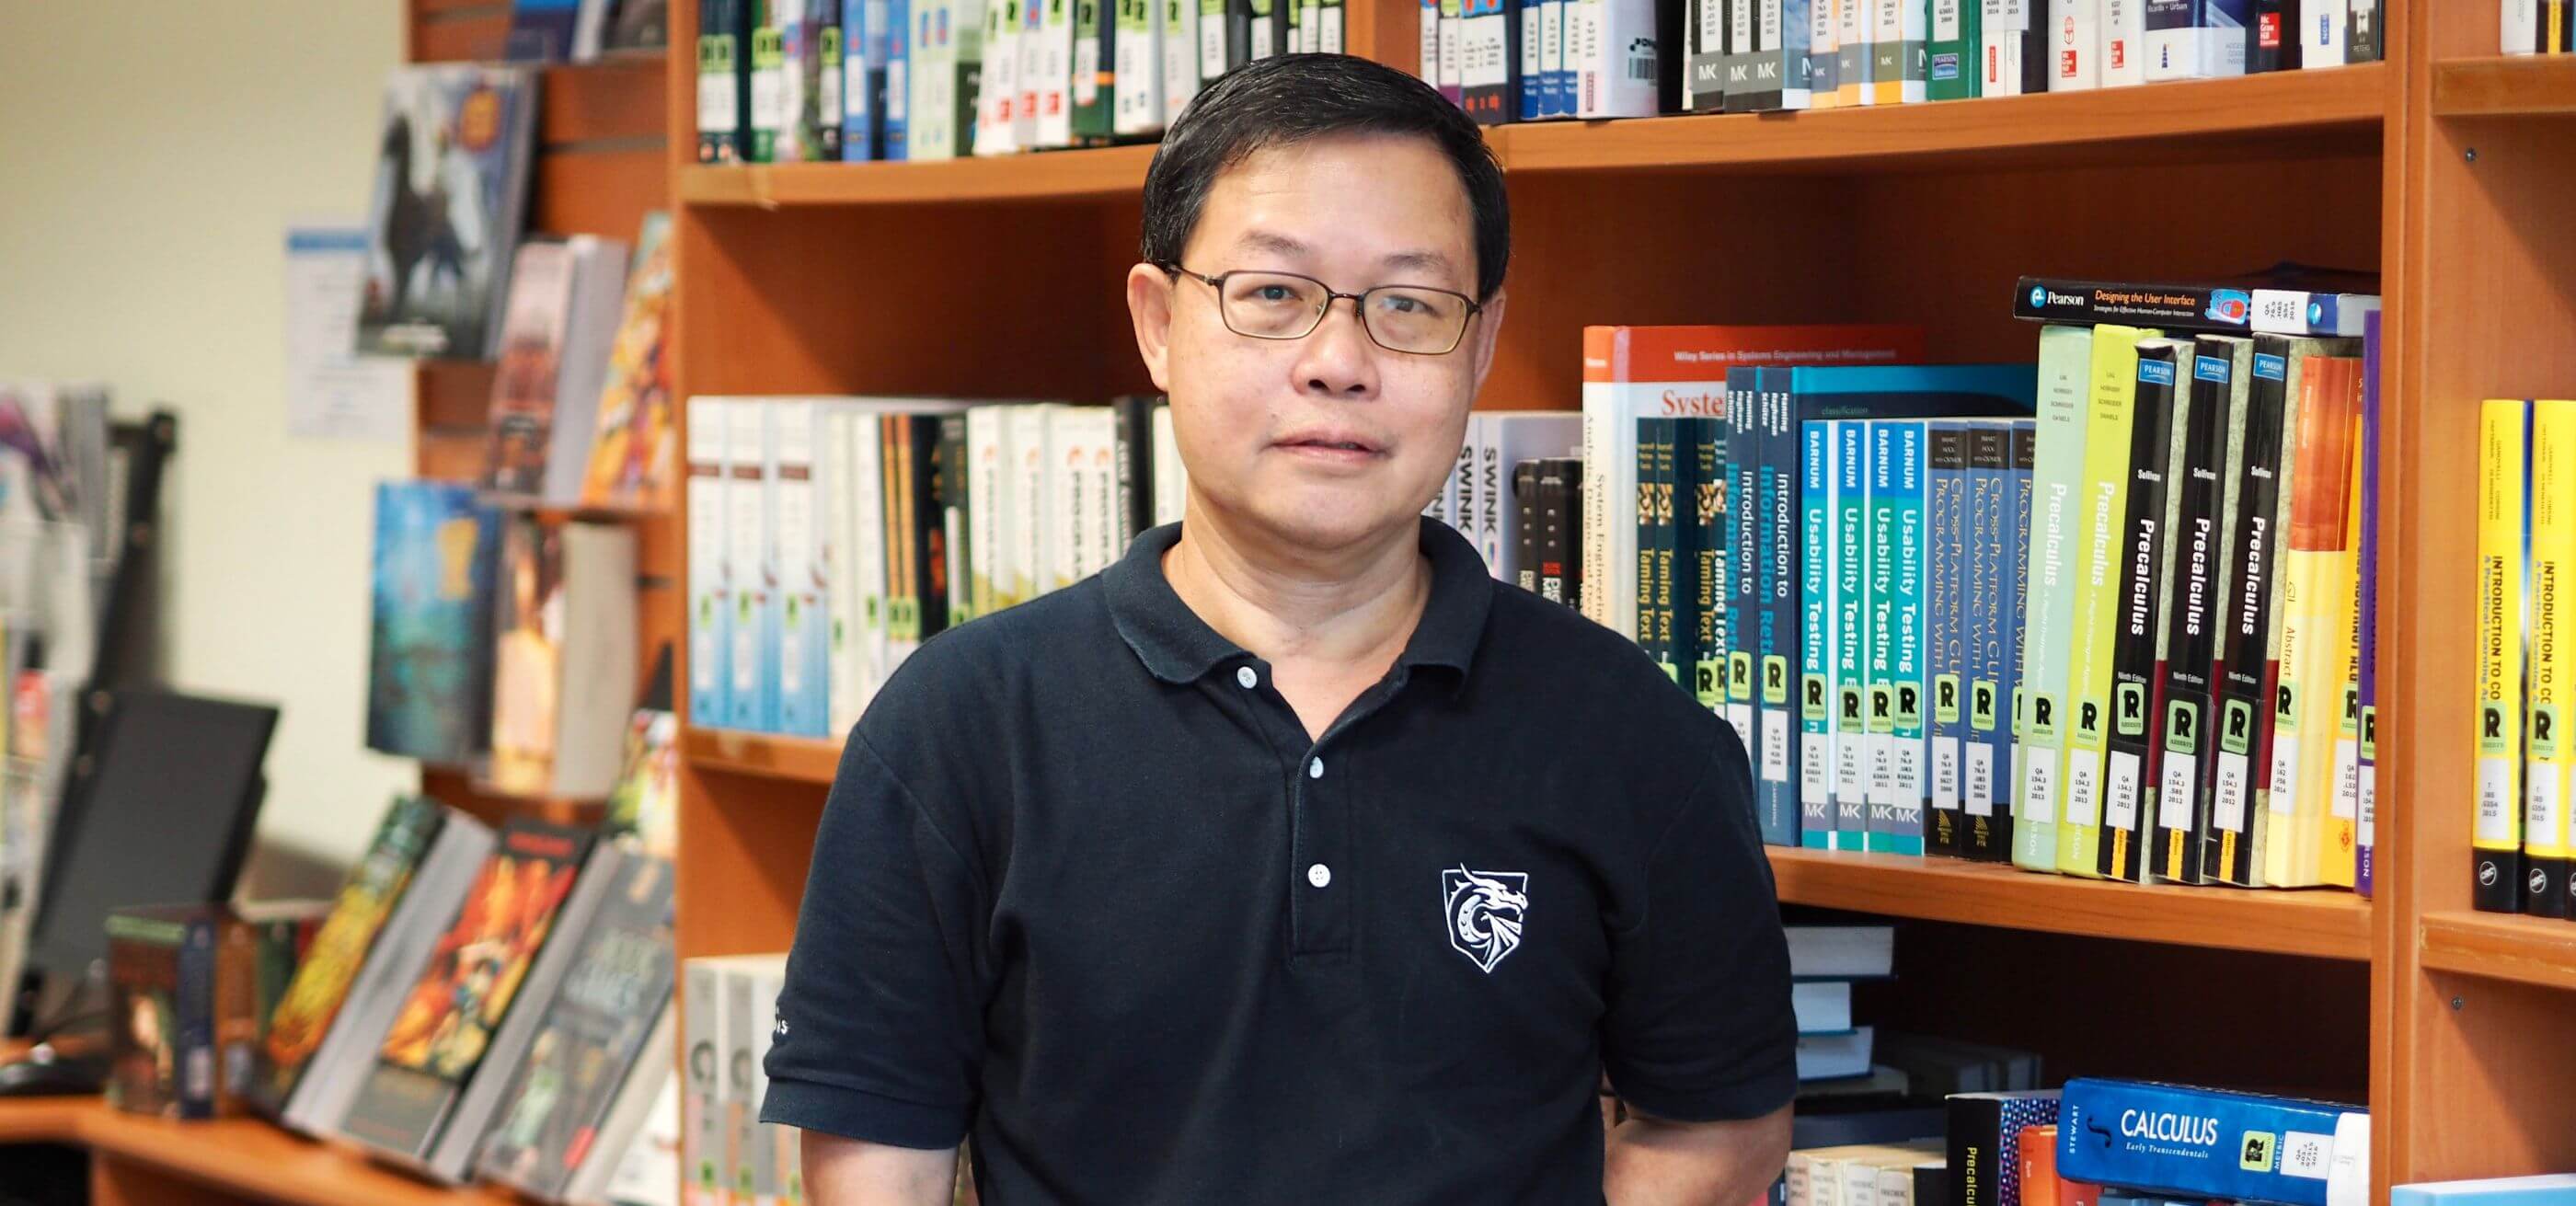 DigiPen Singapore Dept. Chair Fong Foo Hoong poses for a photo next to a bookcase